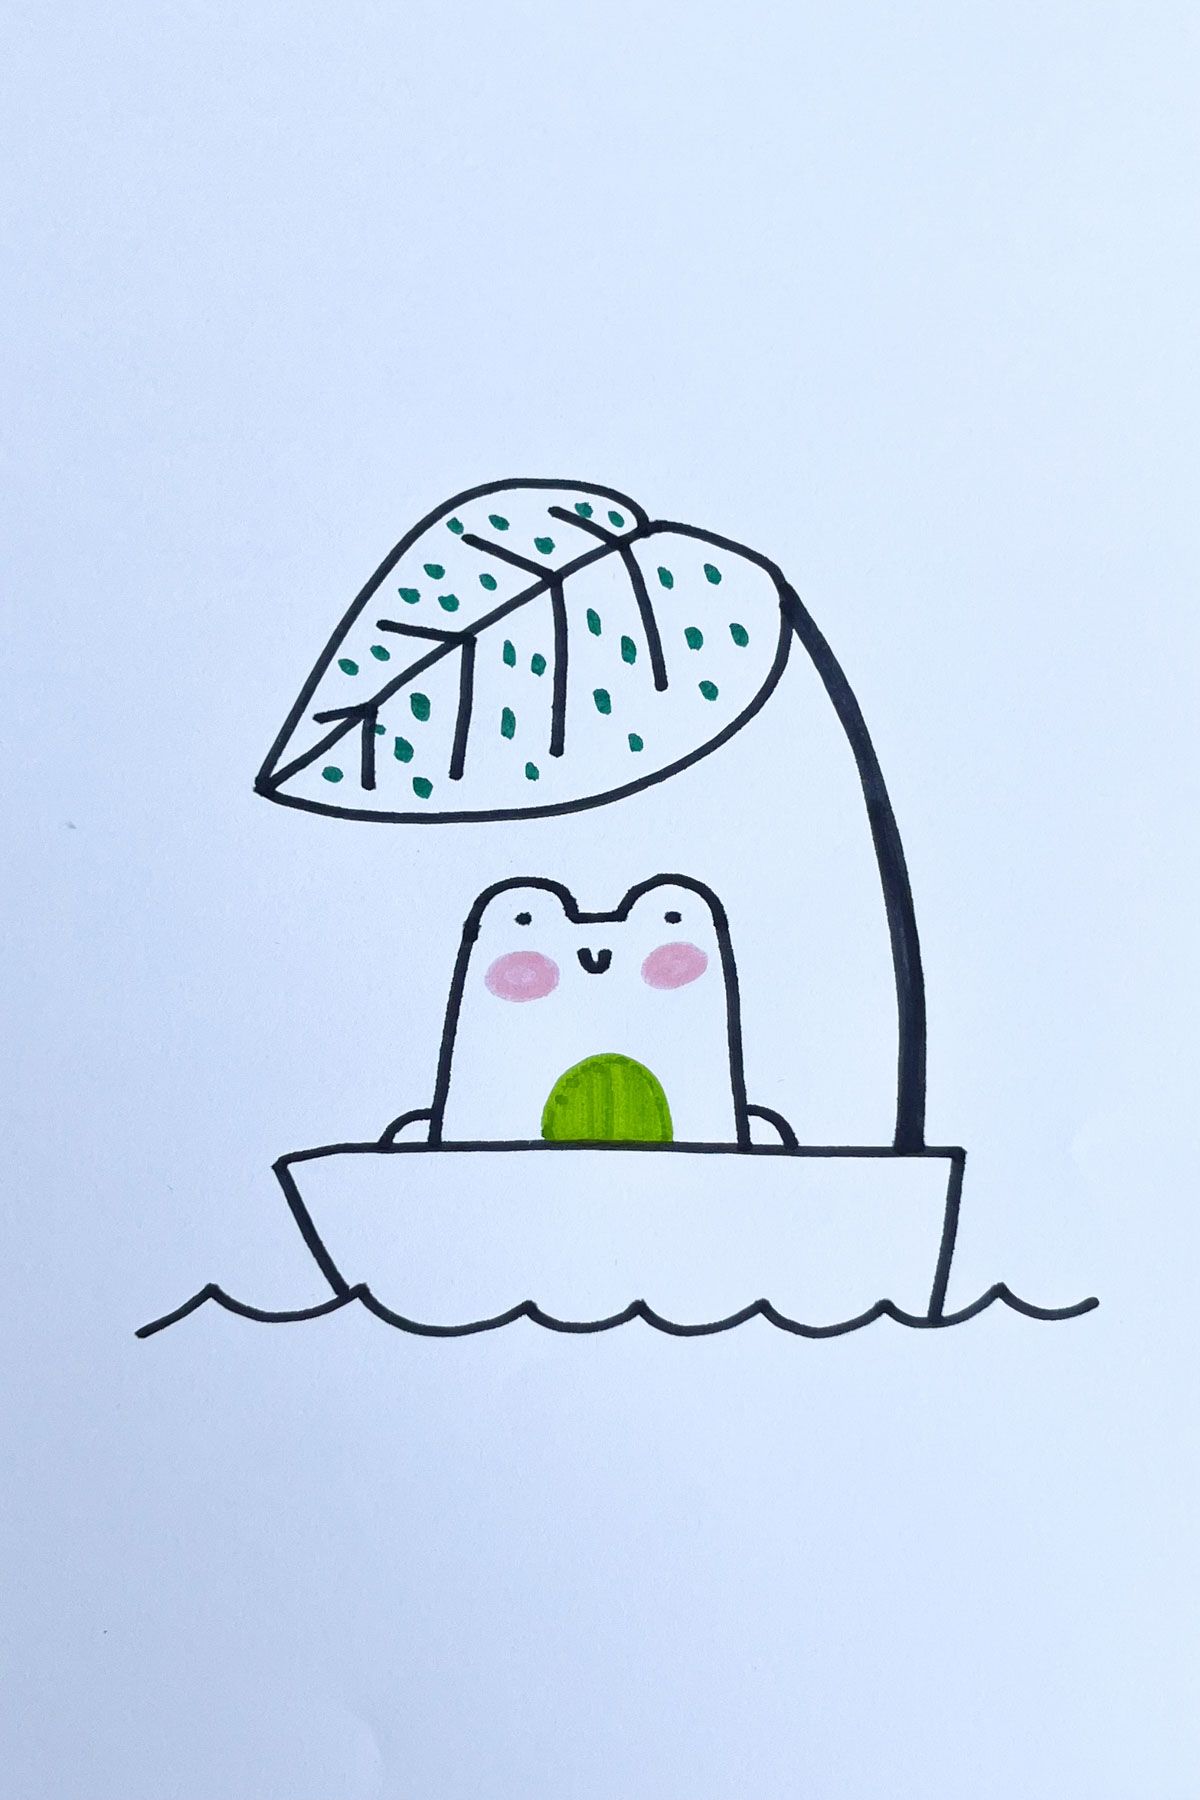 frog in a leaf boat anime drawing